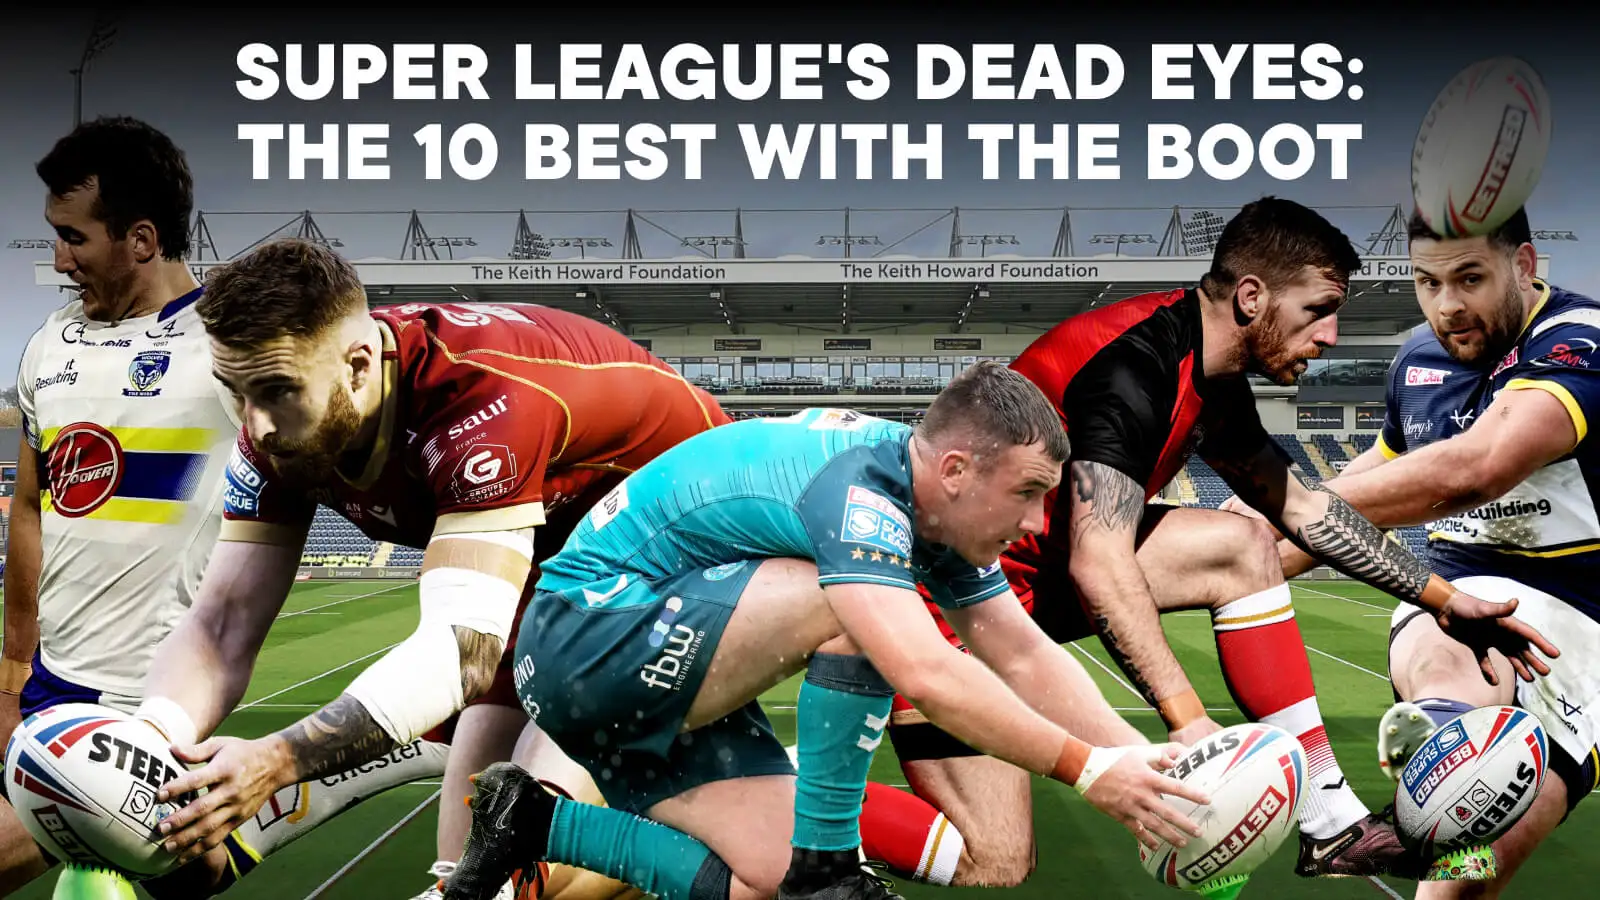 'Super League's Dead Eyes: The 10 best with the Boot', Stefan Ratchford, Adam Keighran, Harry Smith, Marc Sneyd & Rhyse Martin in front of Headingley background